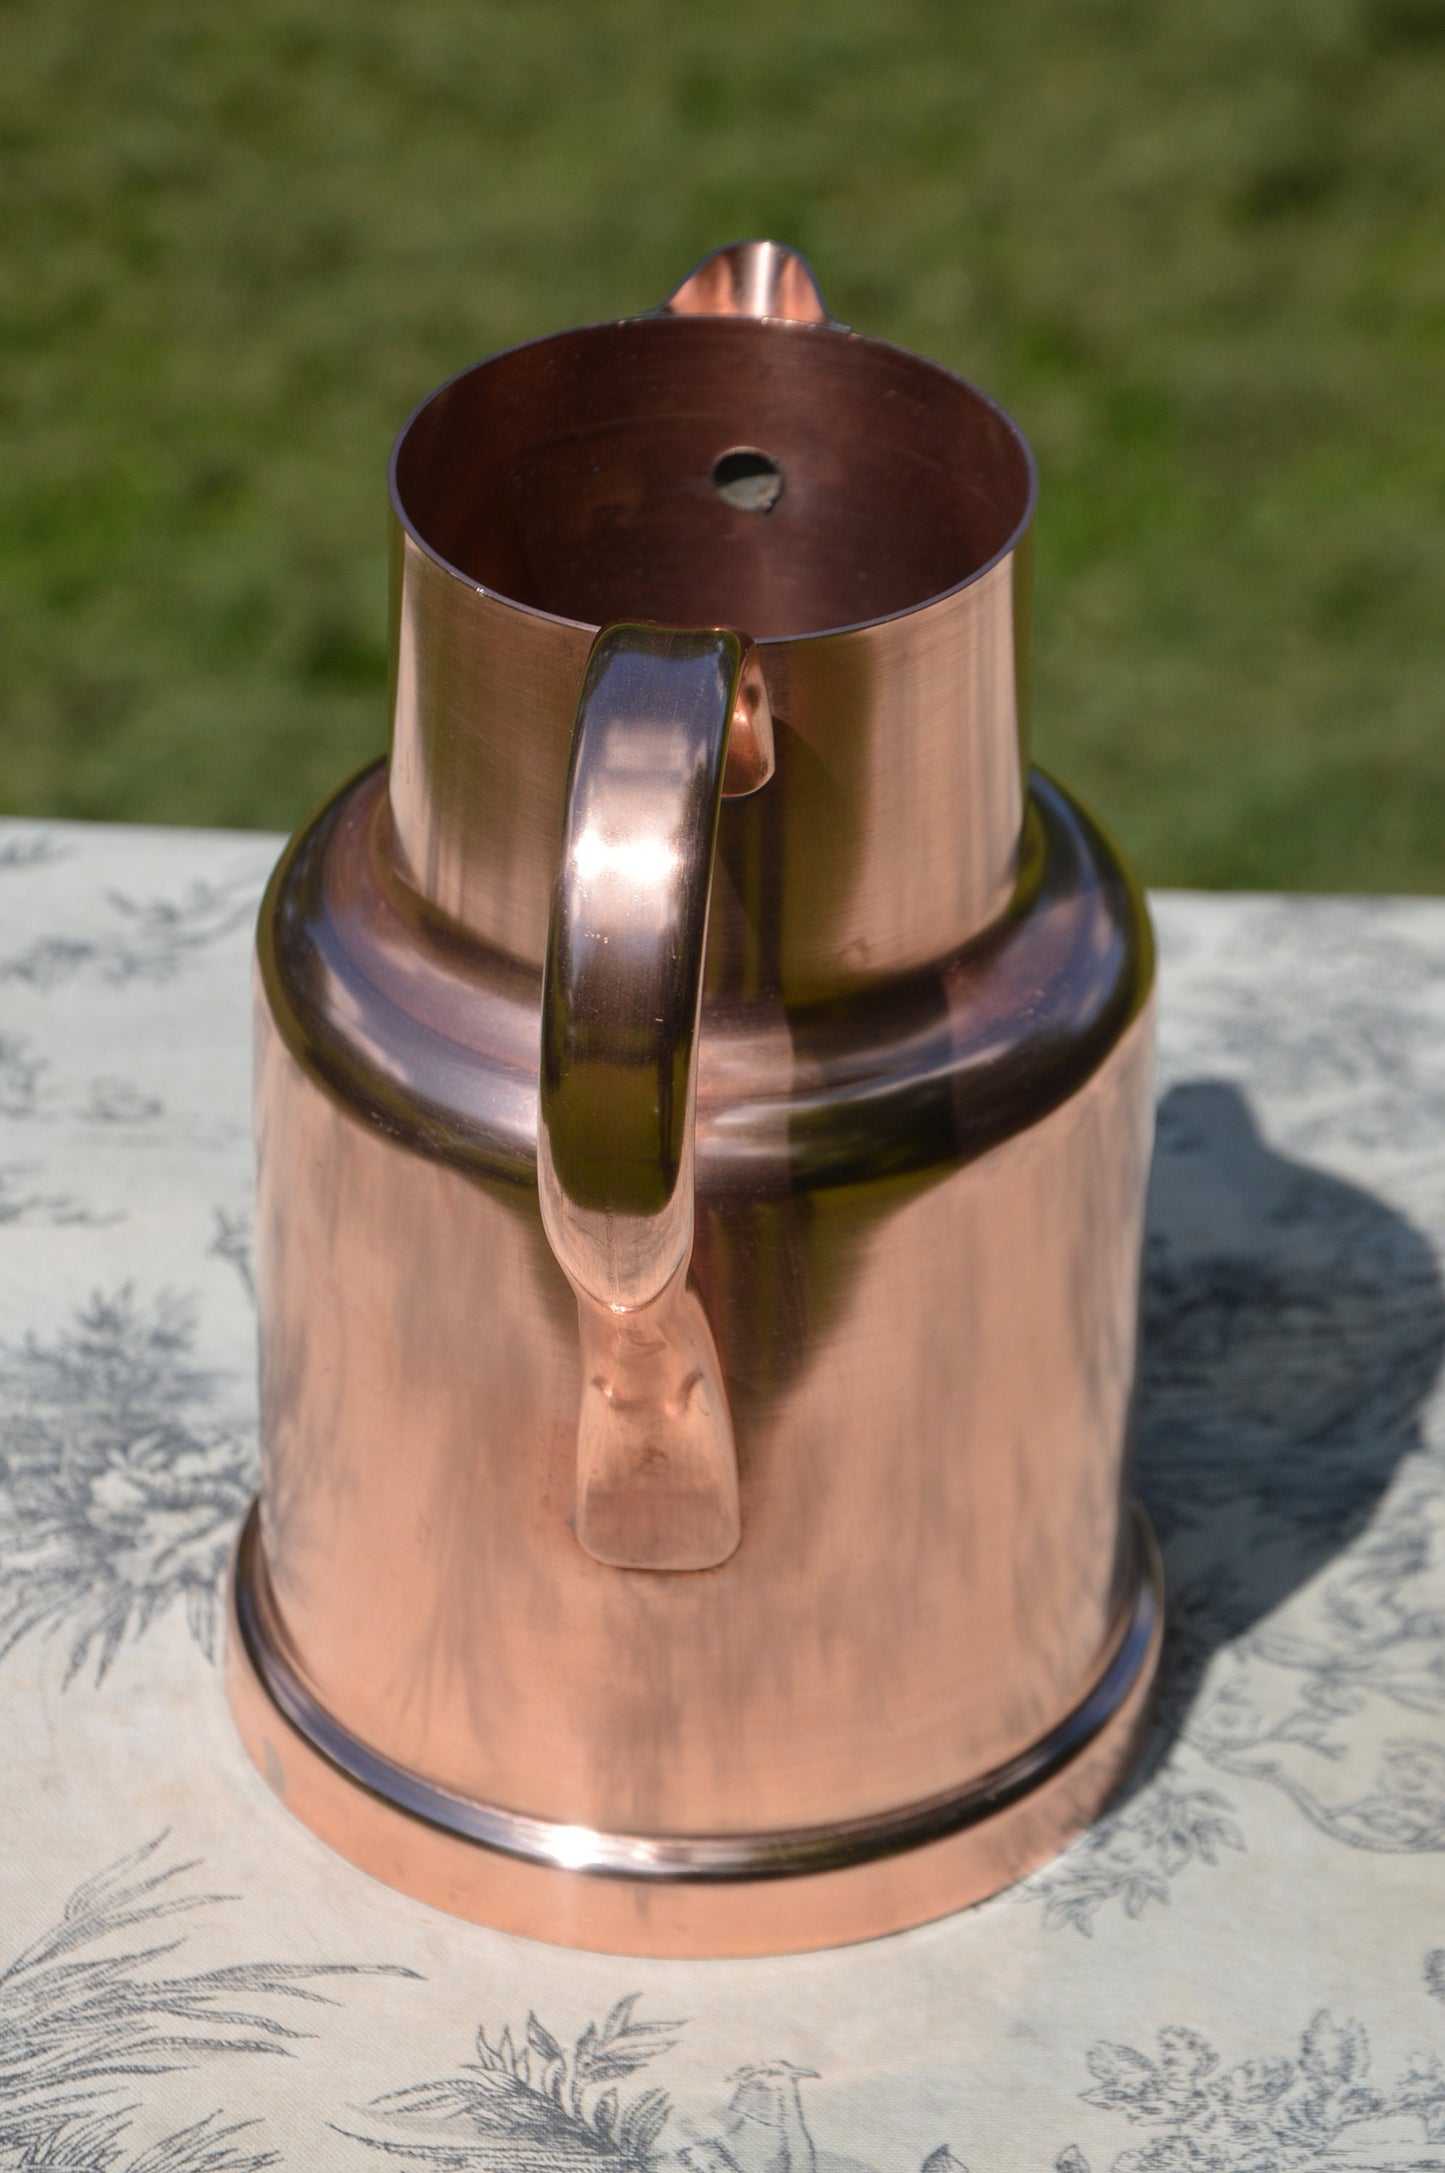 Delalande Vintage French Copper Jug Utensil Holder Copper Pitcher Solid Copper Handle Hand Hammered Mid Century Artisan Made Water Tight